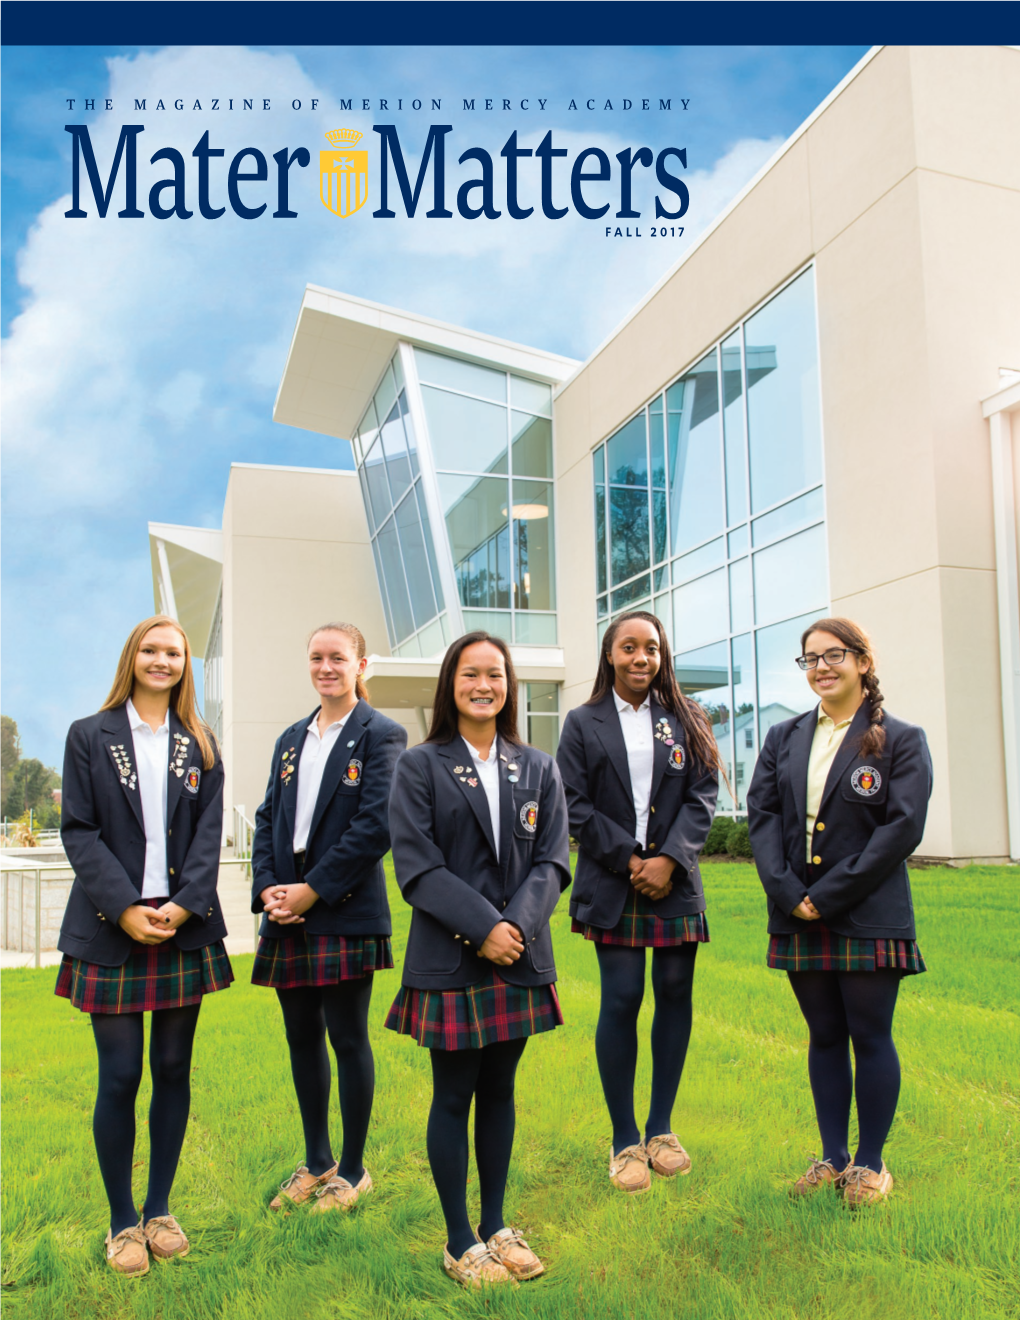 Mater Mattersfall 2017 Opening Comments